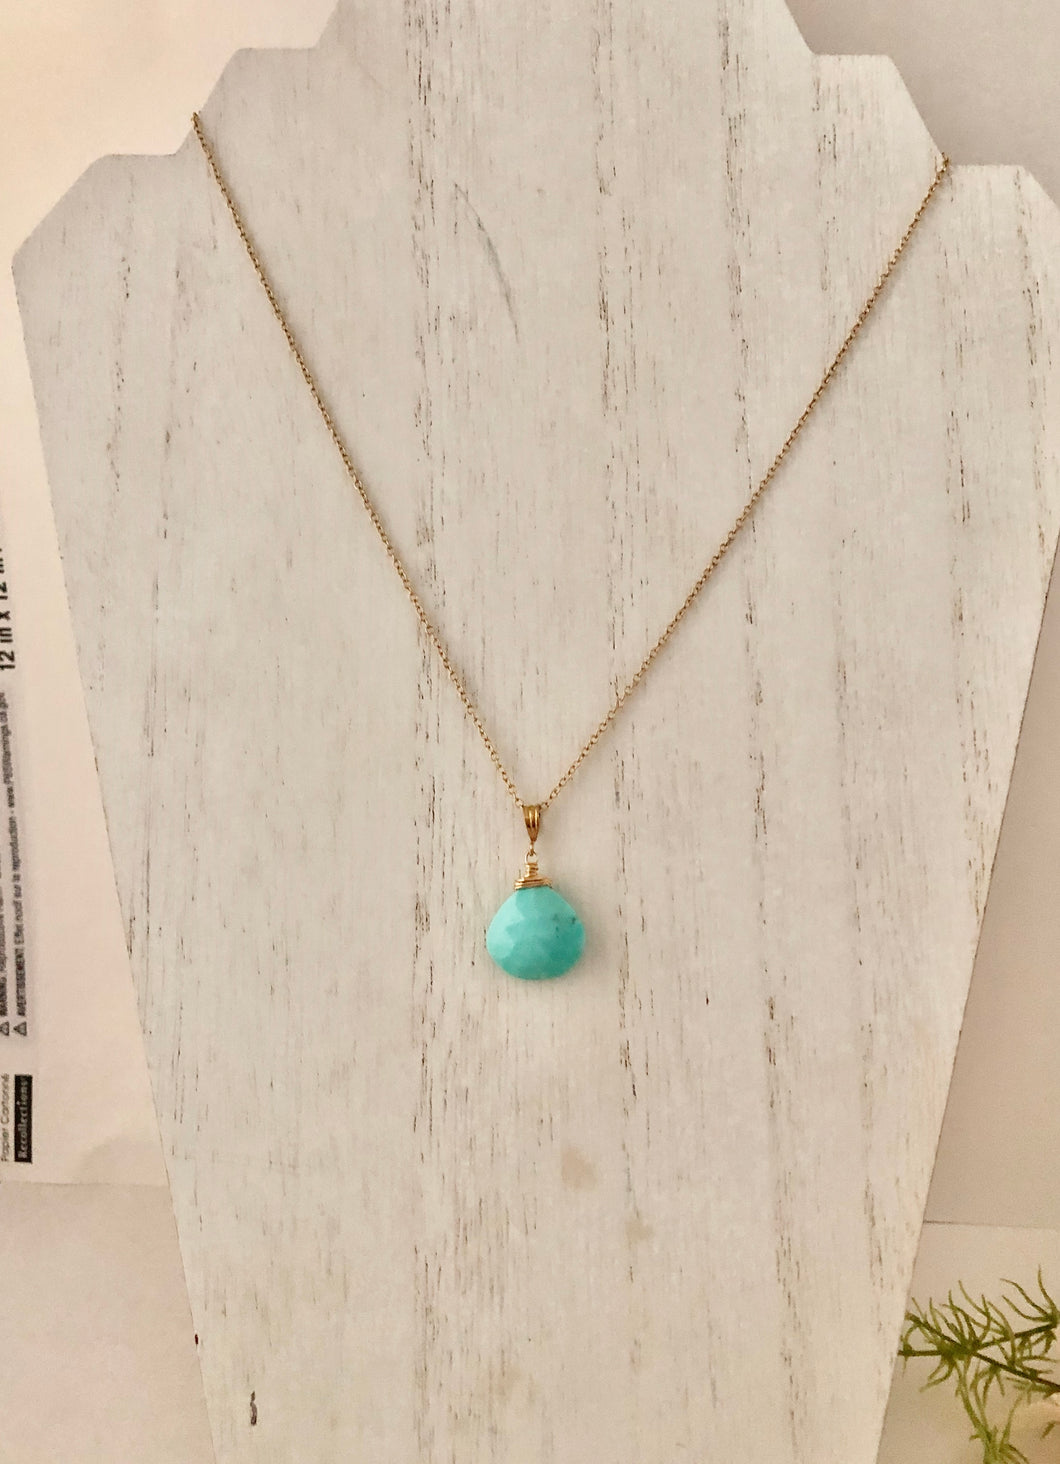 Turquoise Pendant Necklace on 14K Gold Fill Chain